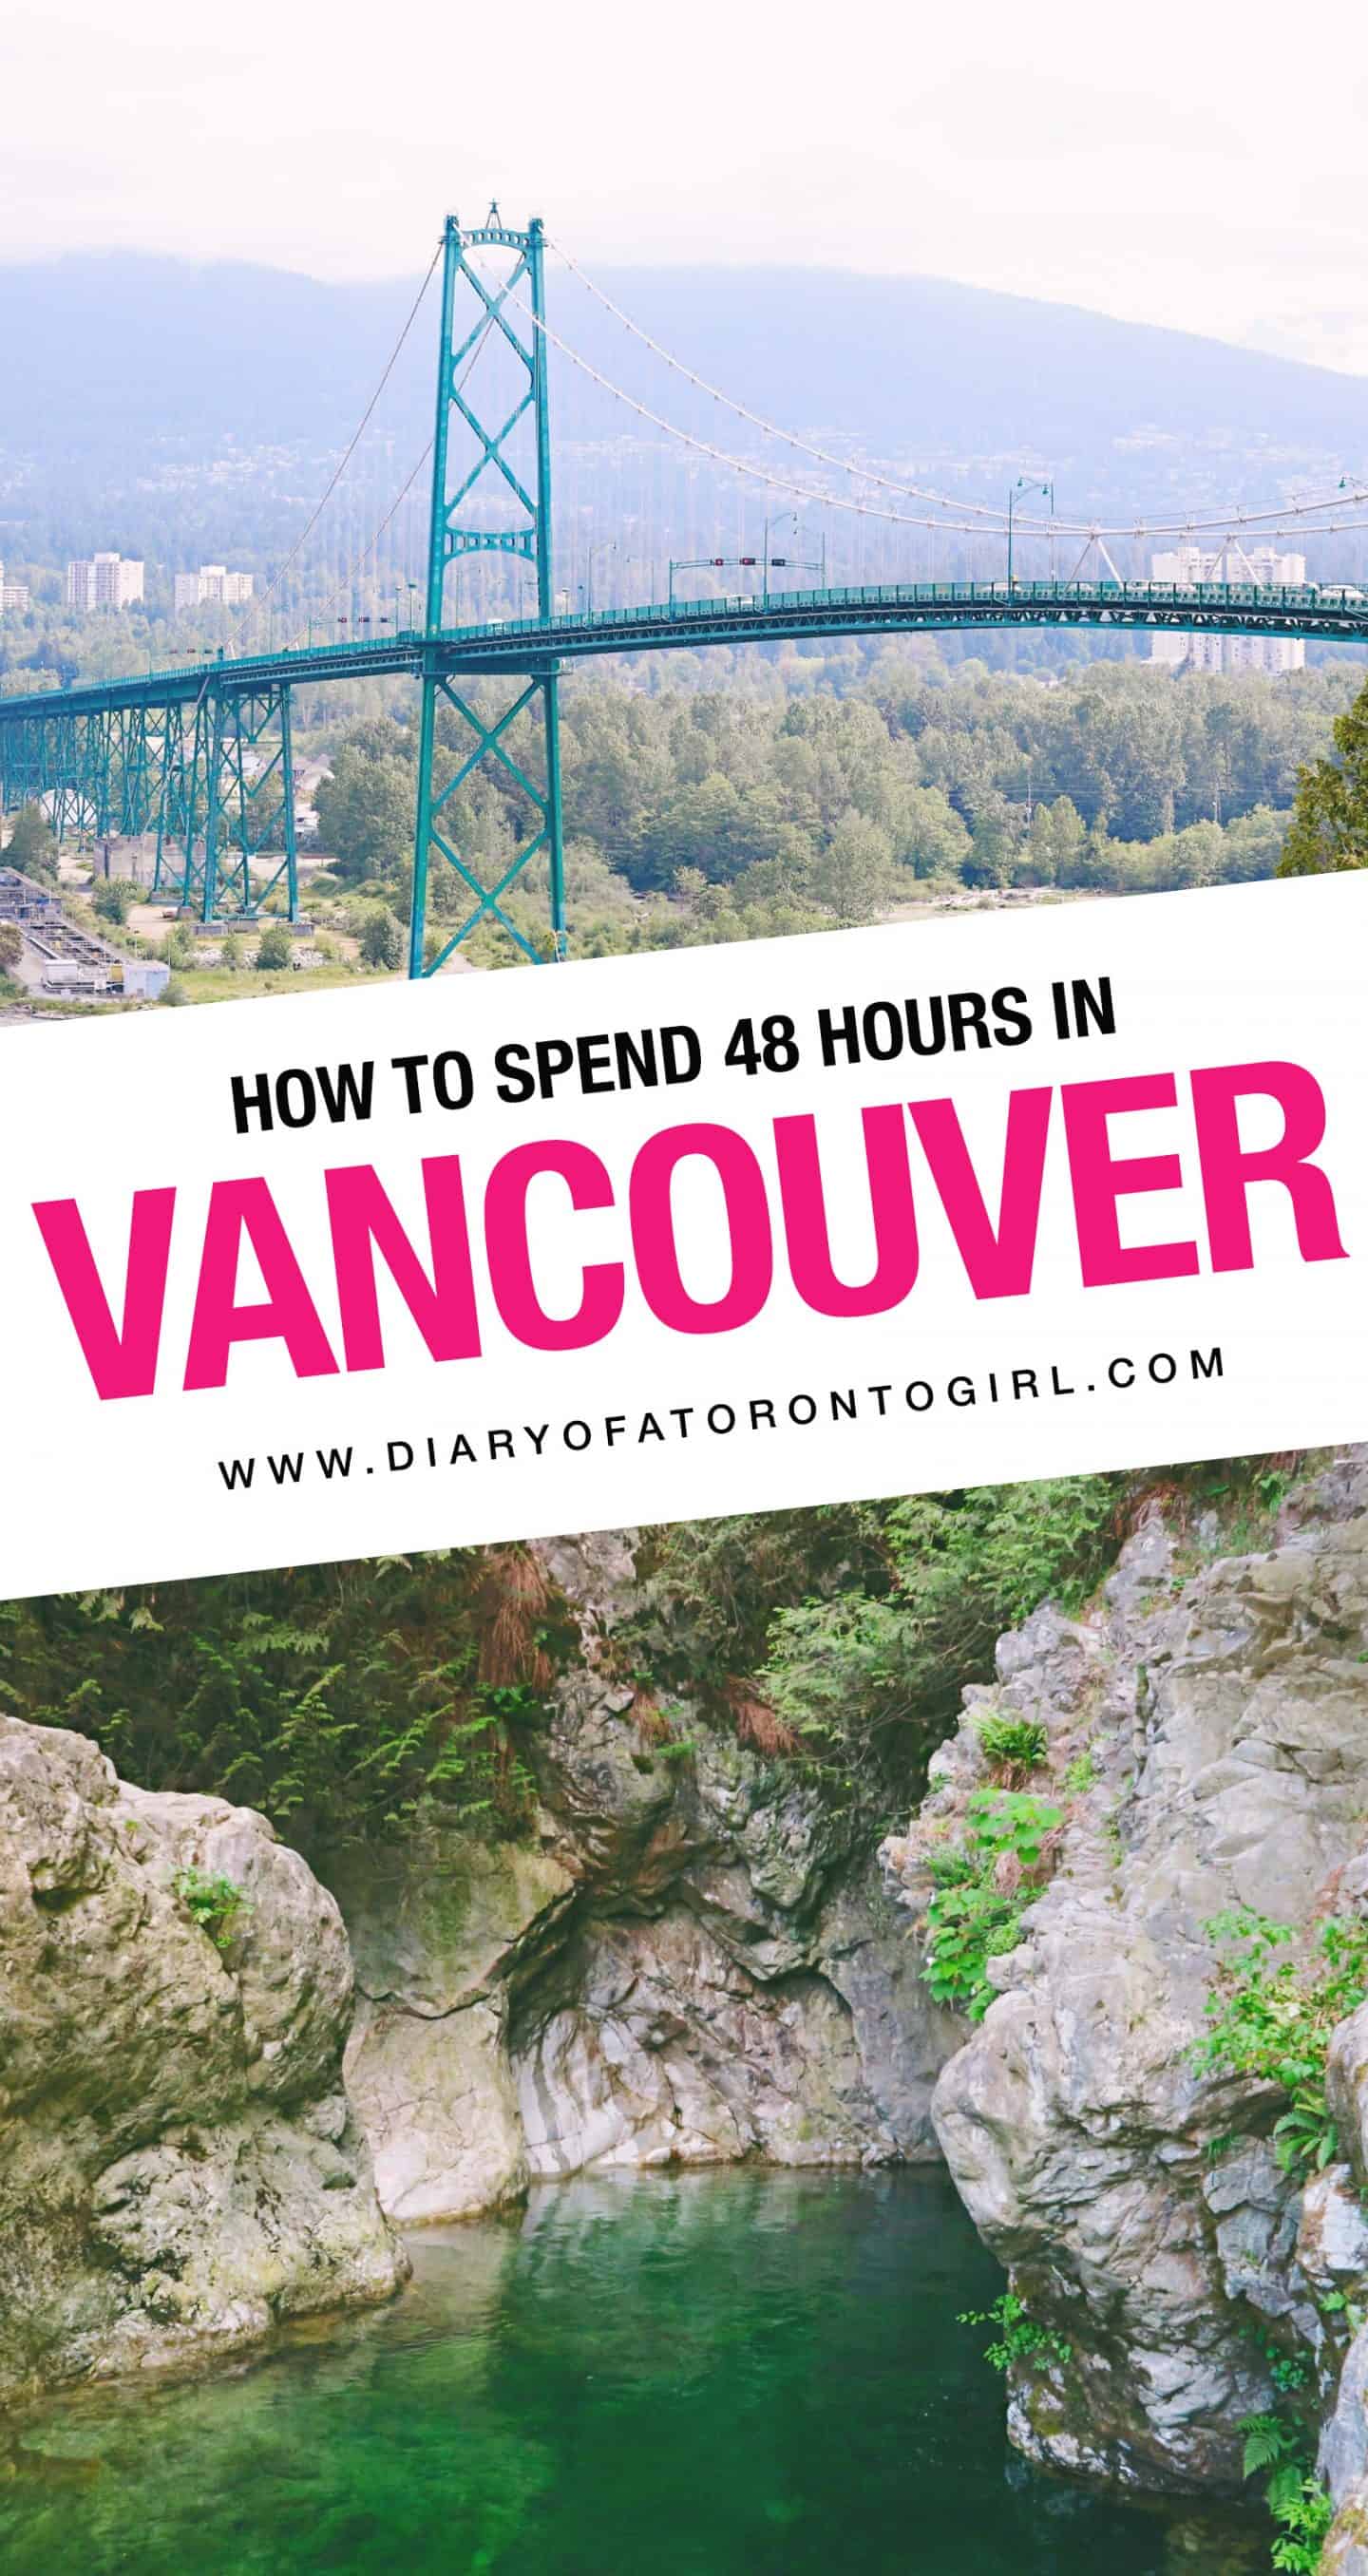 Looking for fun things to do in Vancouver during a spring/summer road trip? Here's the perfect itinerary on how to spend 48 hours in Vancouver, British Columbia!